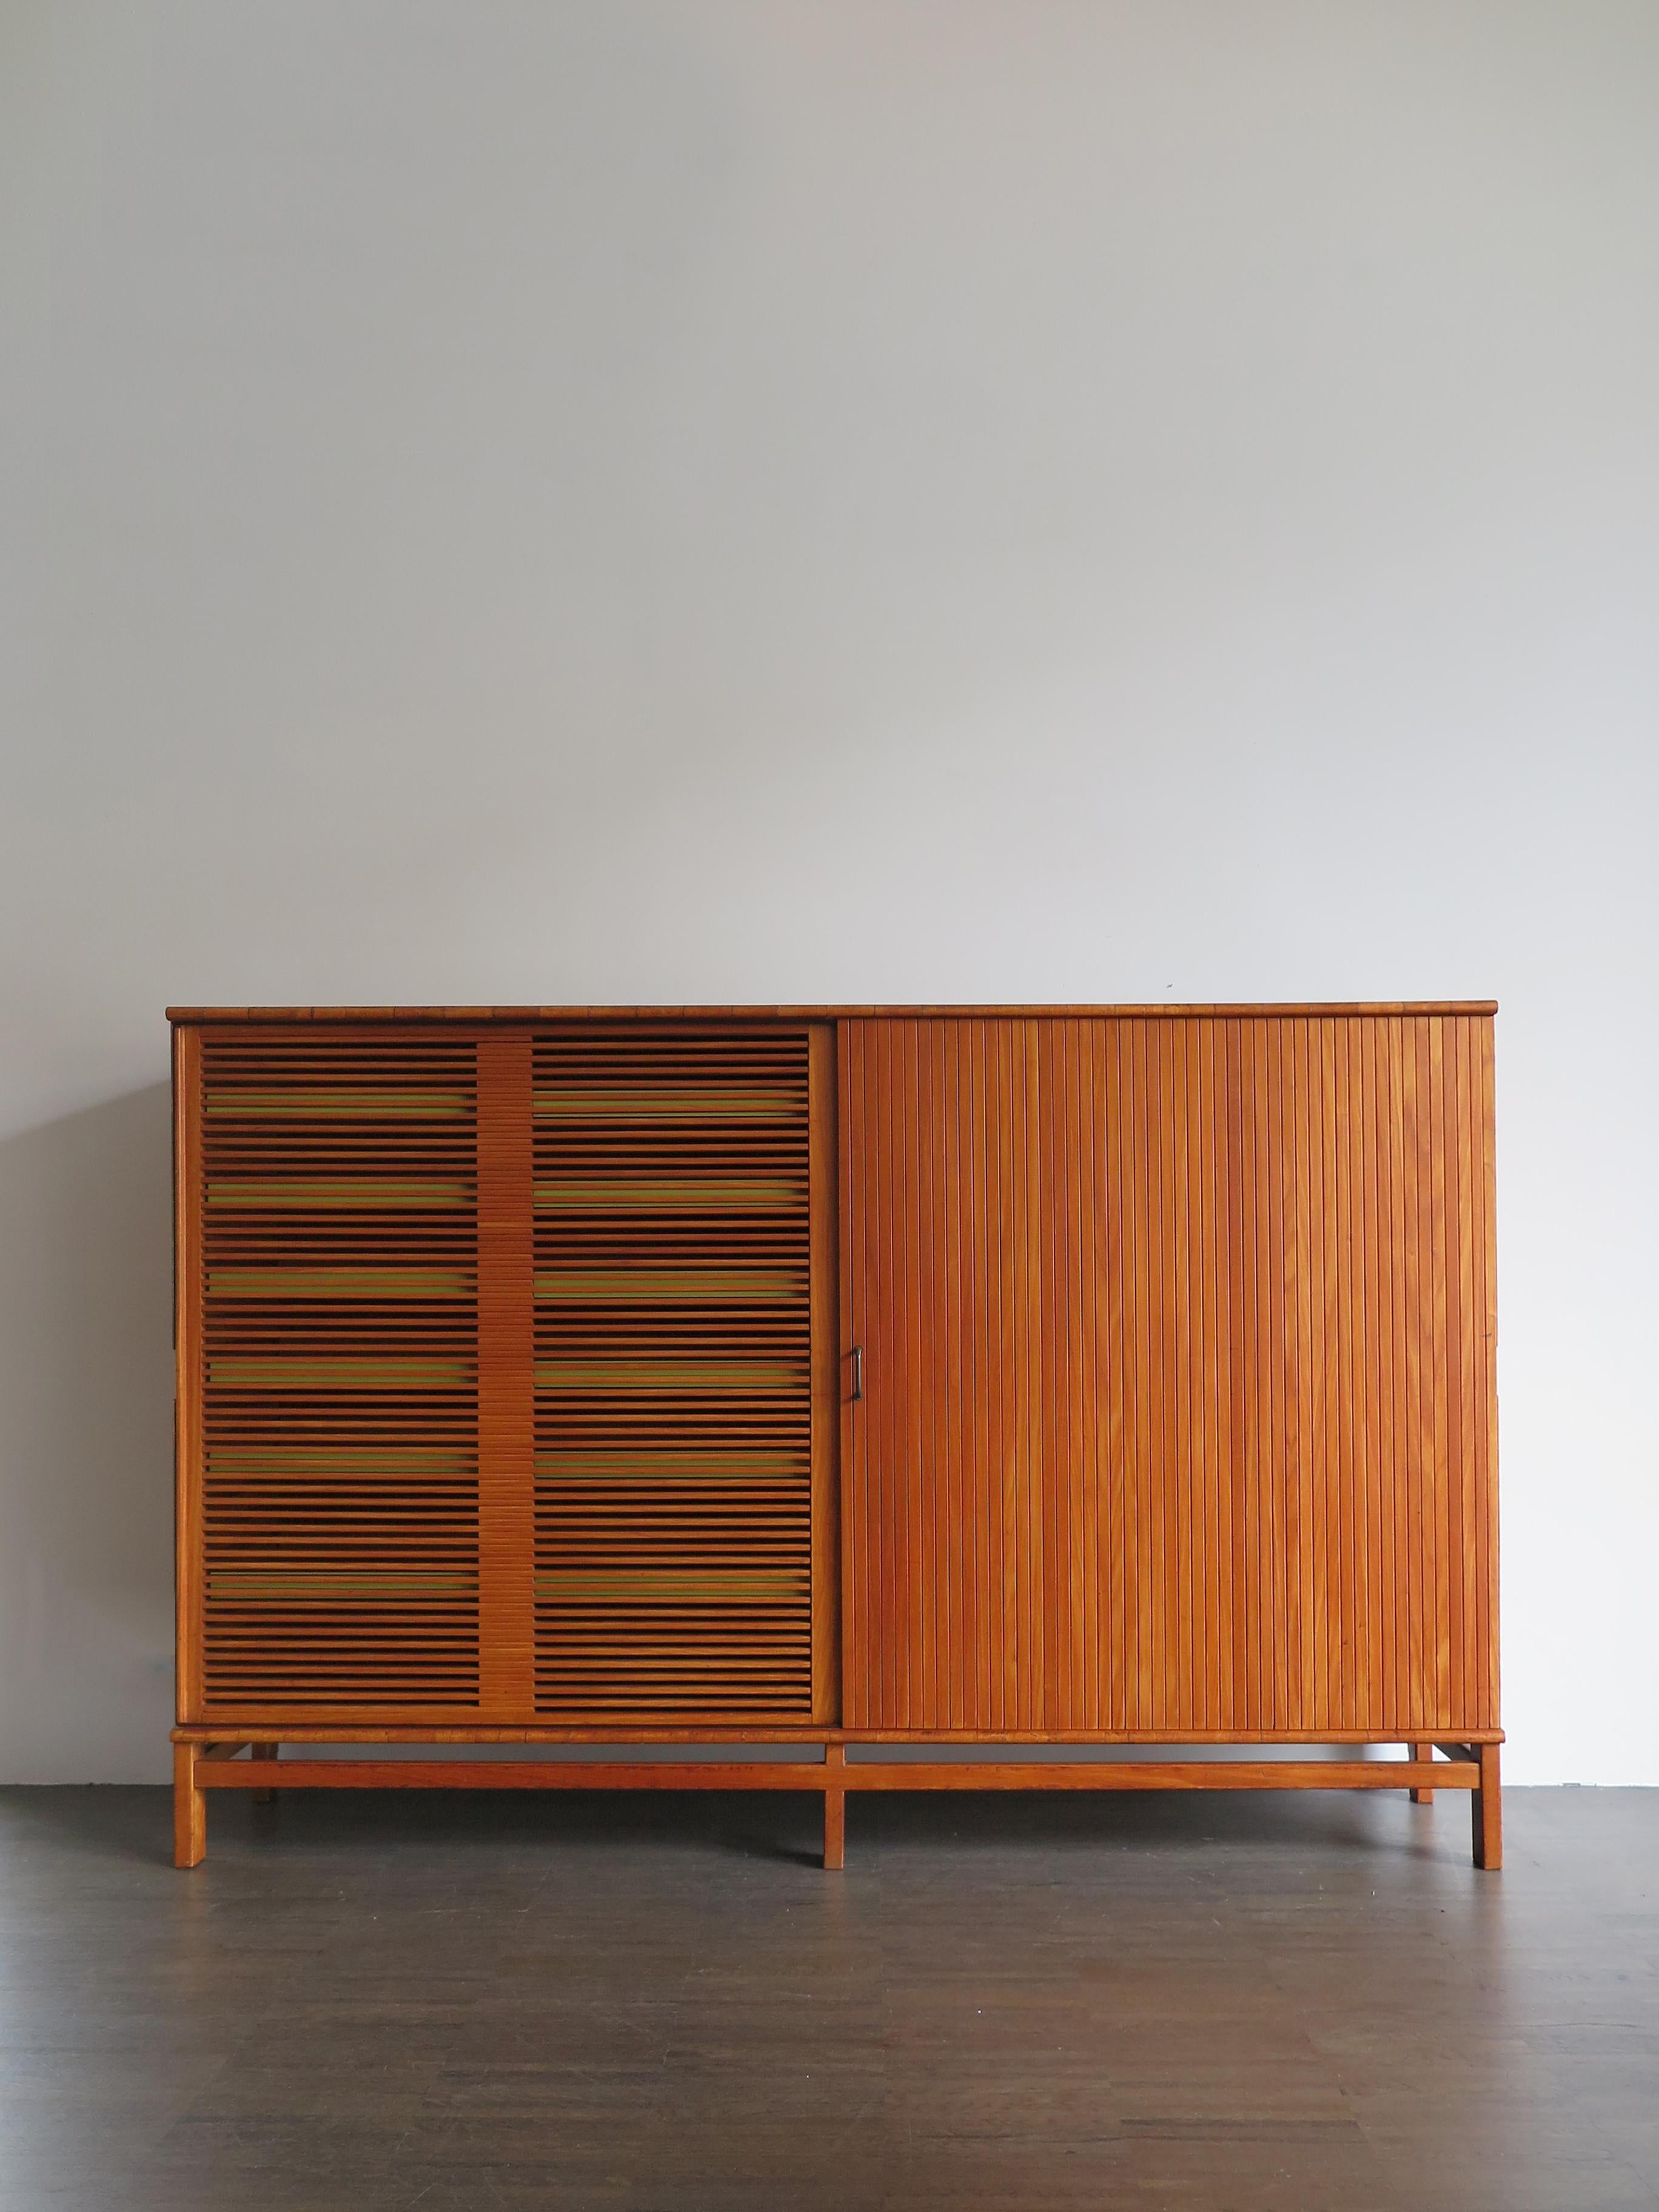 Midcentury modern design large chest of drawers or cabinet, designed by Finnish designer Ilmari Tapiovaara for Selettiva di Cantù, wooden structure with two large sliding doors and modular drawers with yellow formica front and brass detail at the